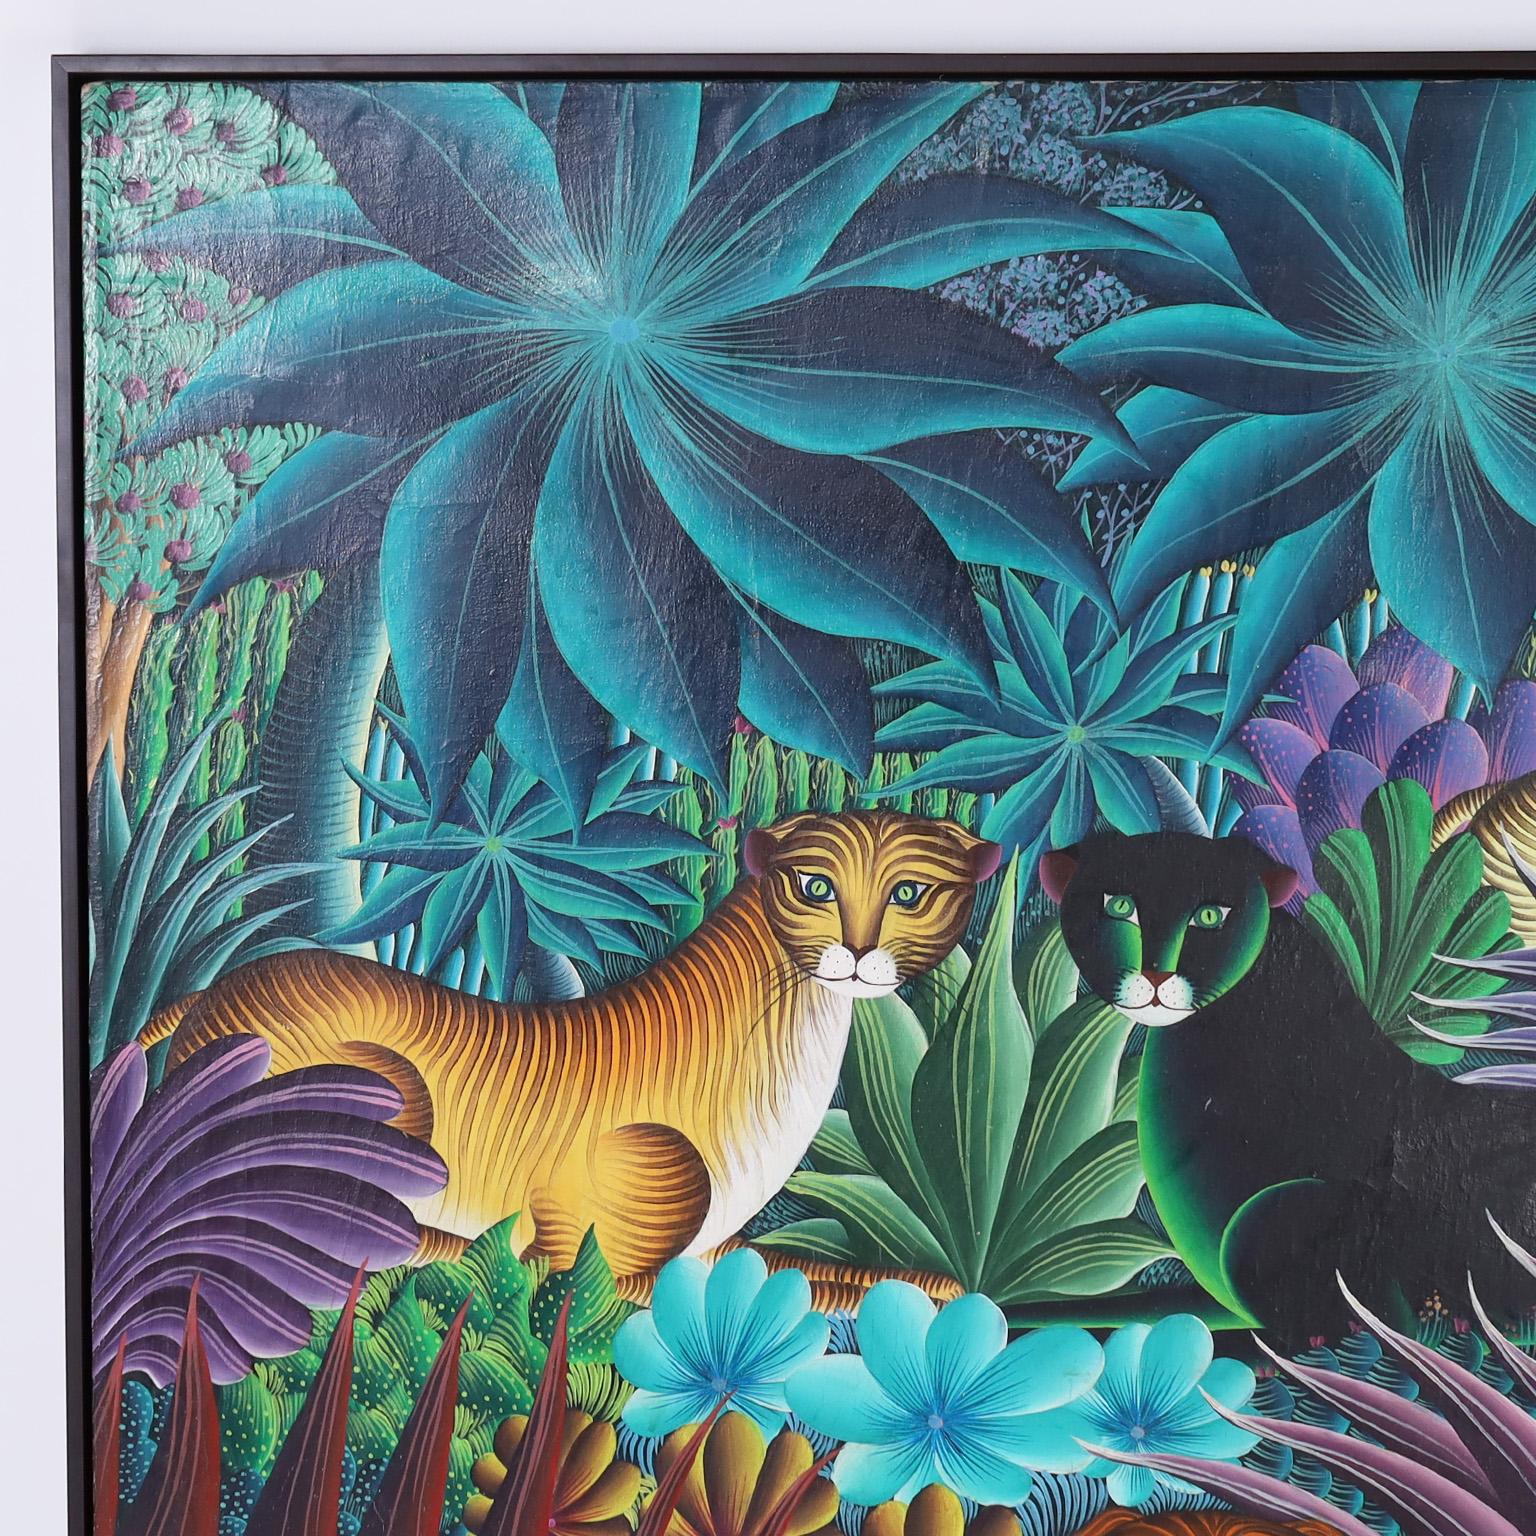 Haitian acrylic painting on canvas of stylized big cats in a lush jungle setting with fruit trees, palm trees, and assorted tropical flora. Signed by noted artist M. Paul and presented in a wood frame.